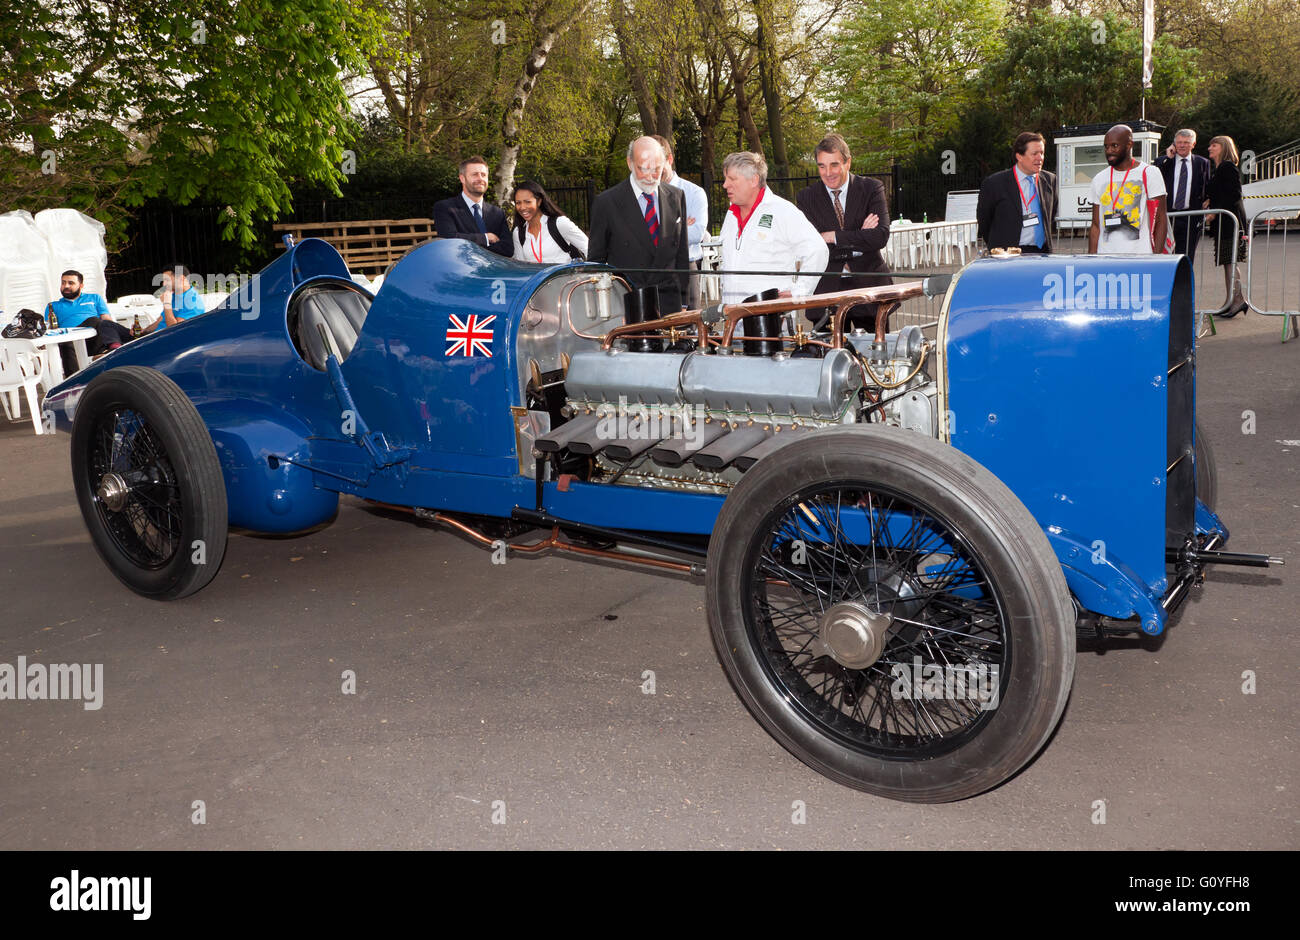 Nigal Mansell and Prince Michael of Kent enjoying Malcolm Campbell's world record breaking 350HP V12 Sunbeam, which was on loan from the National Motor Museum, Beaulieu, during the 2016 London Motor Show. Stock Photo